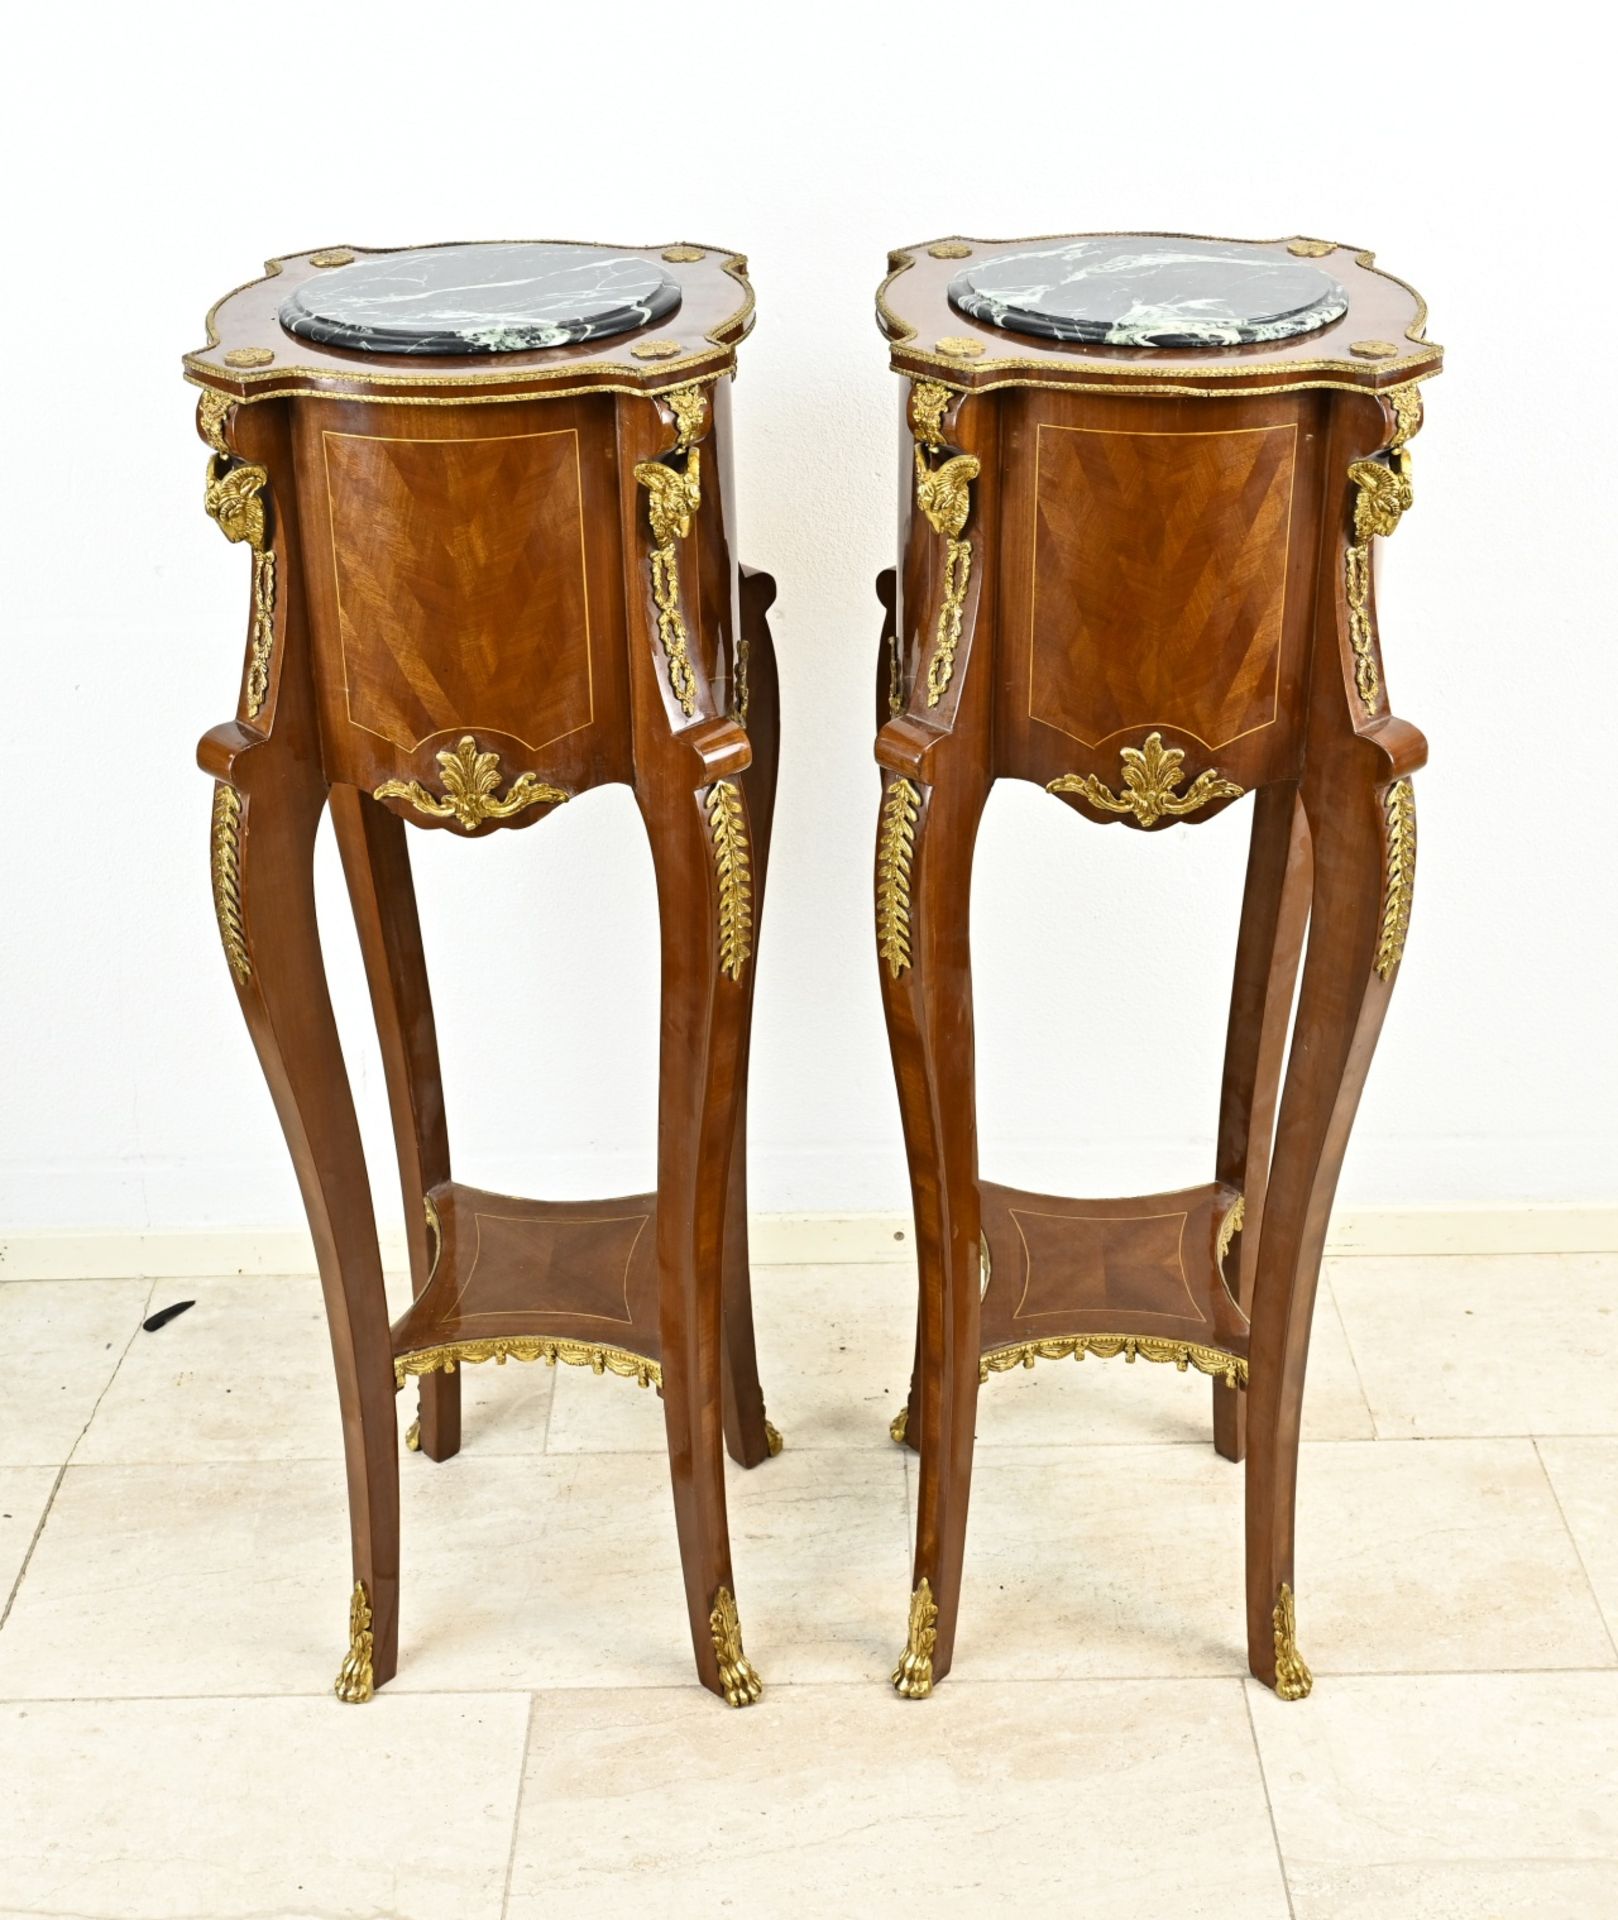 2x Wooden pedestal with marble